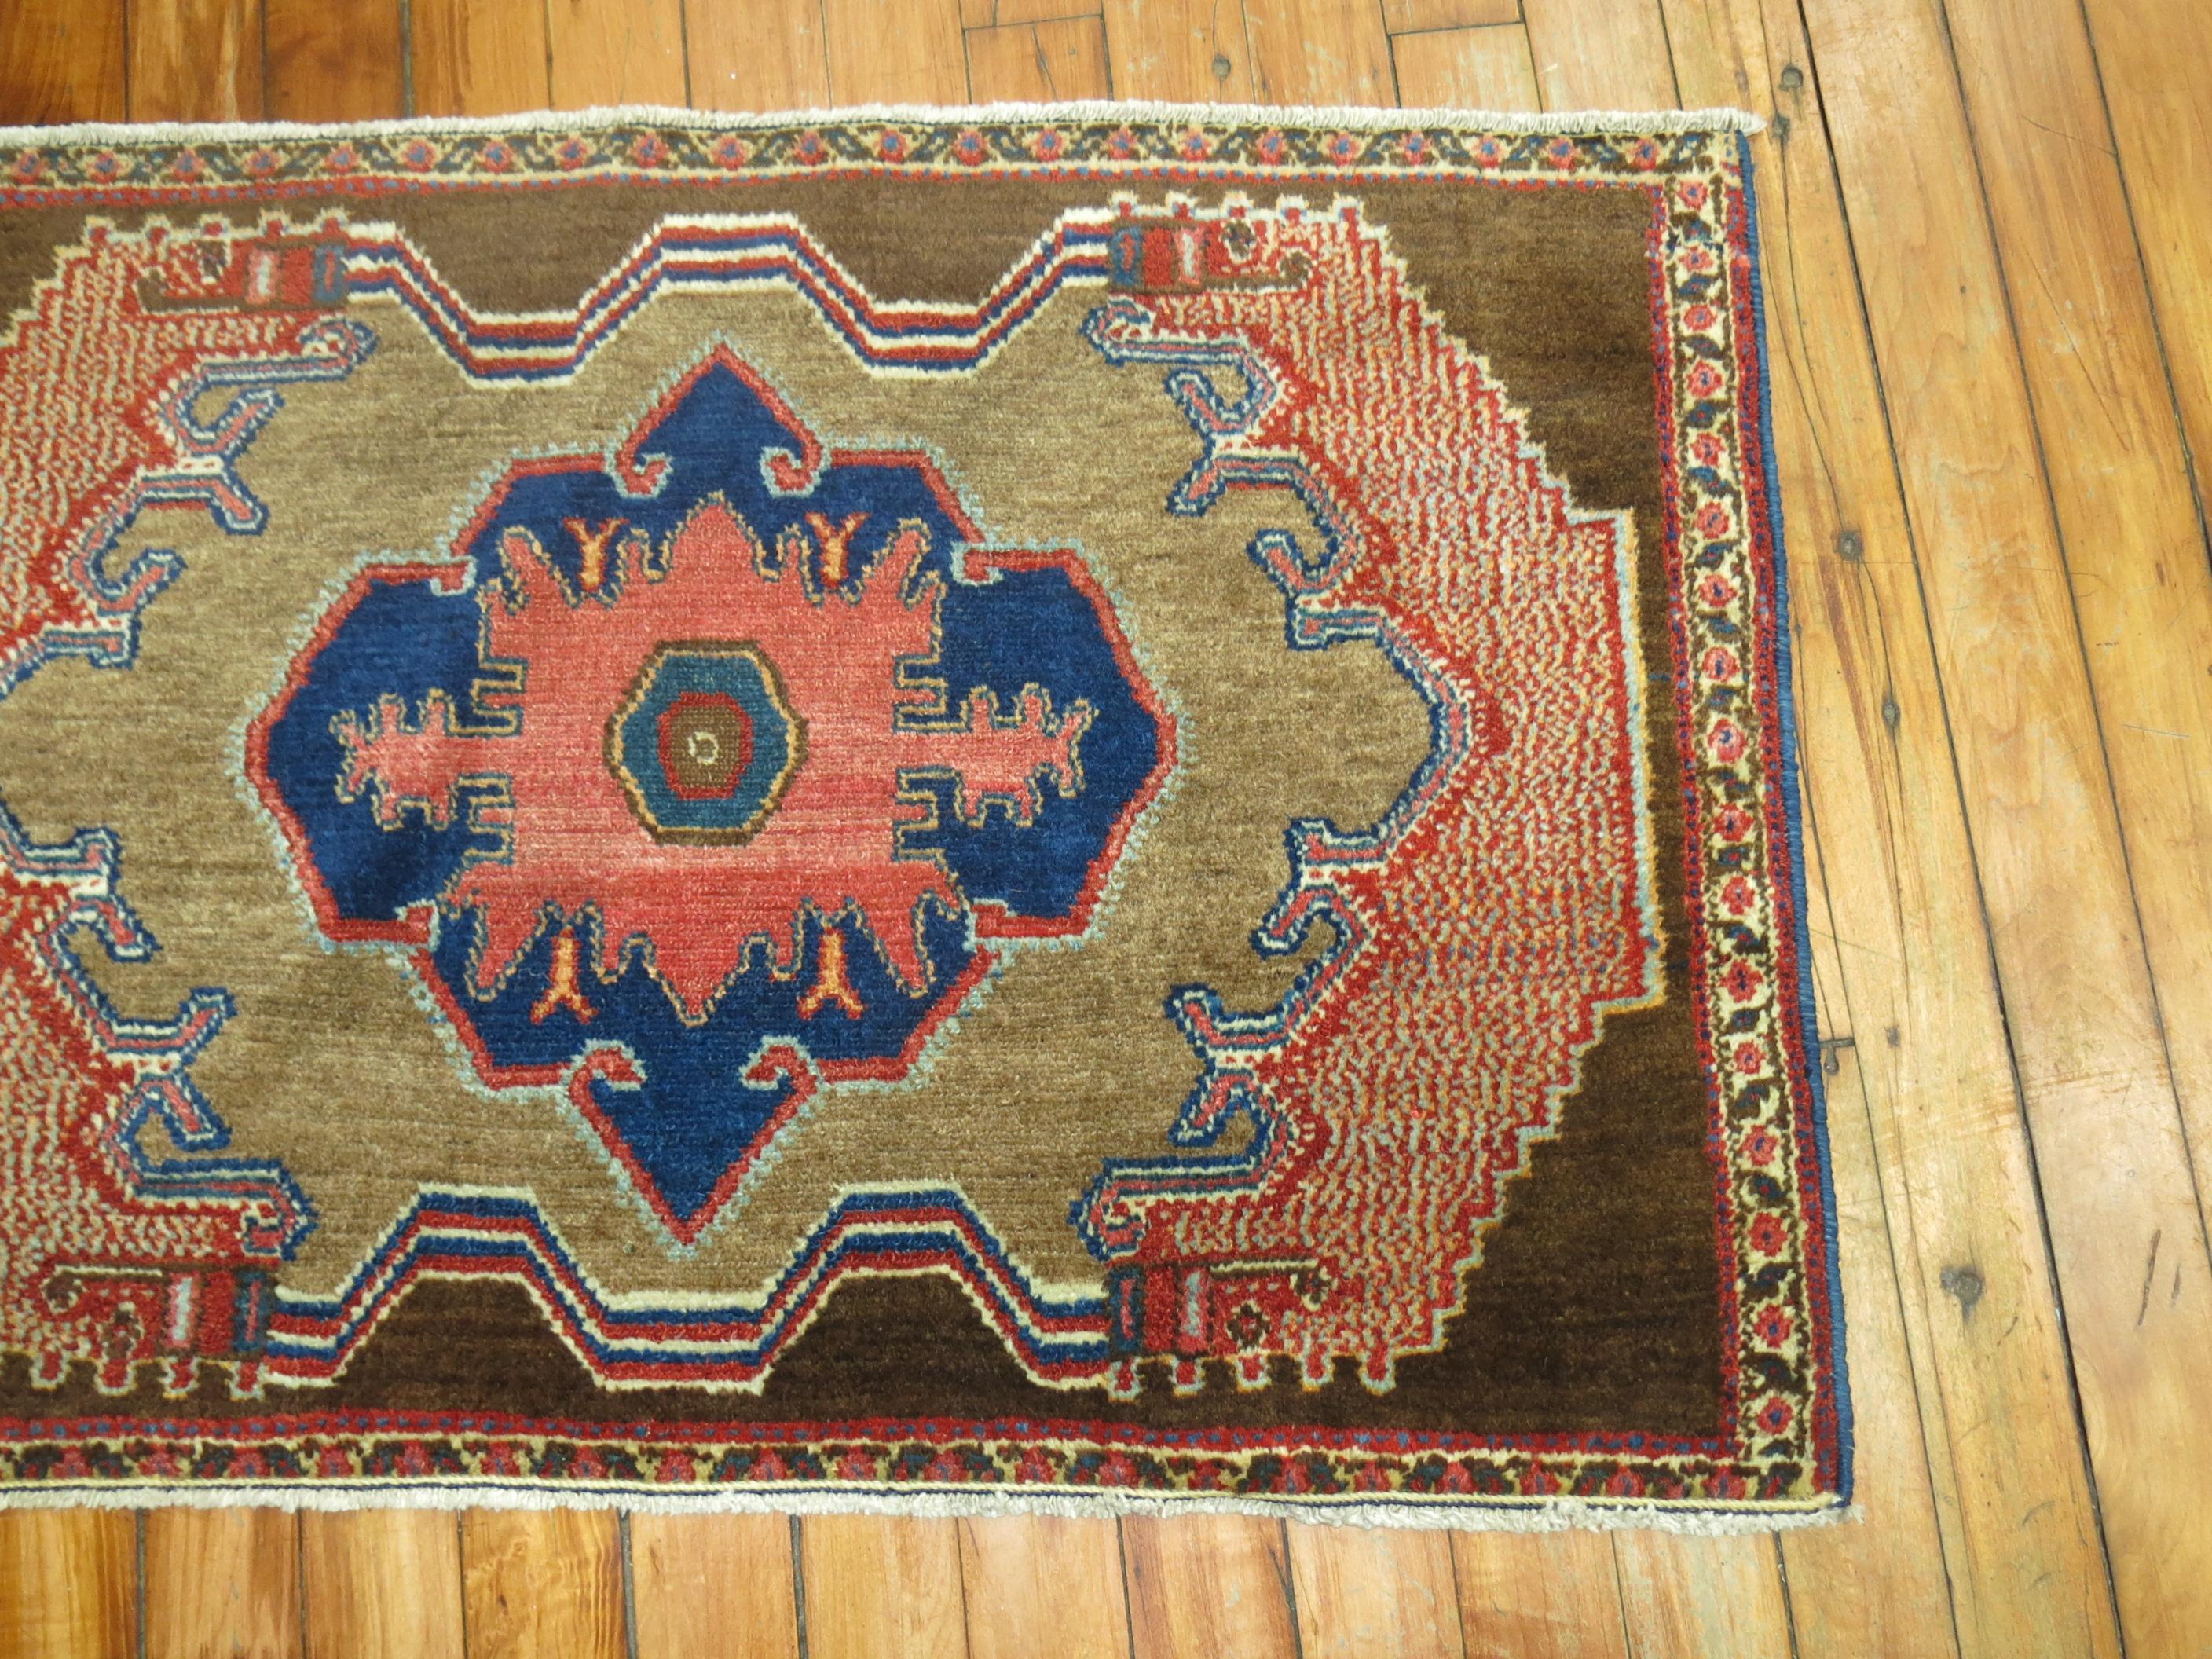 Antique Persian Senneh rug mat. The motif is quite compelling. Primitive and Masculine.


Antique Senneh rugs are one of the most distinctive of all Persian rugs, even though the designs are often similar to Bidjar rugs and Tabriz rugs but just